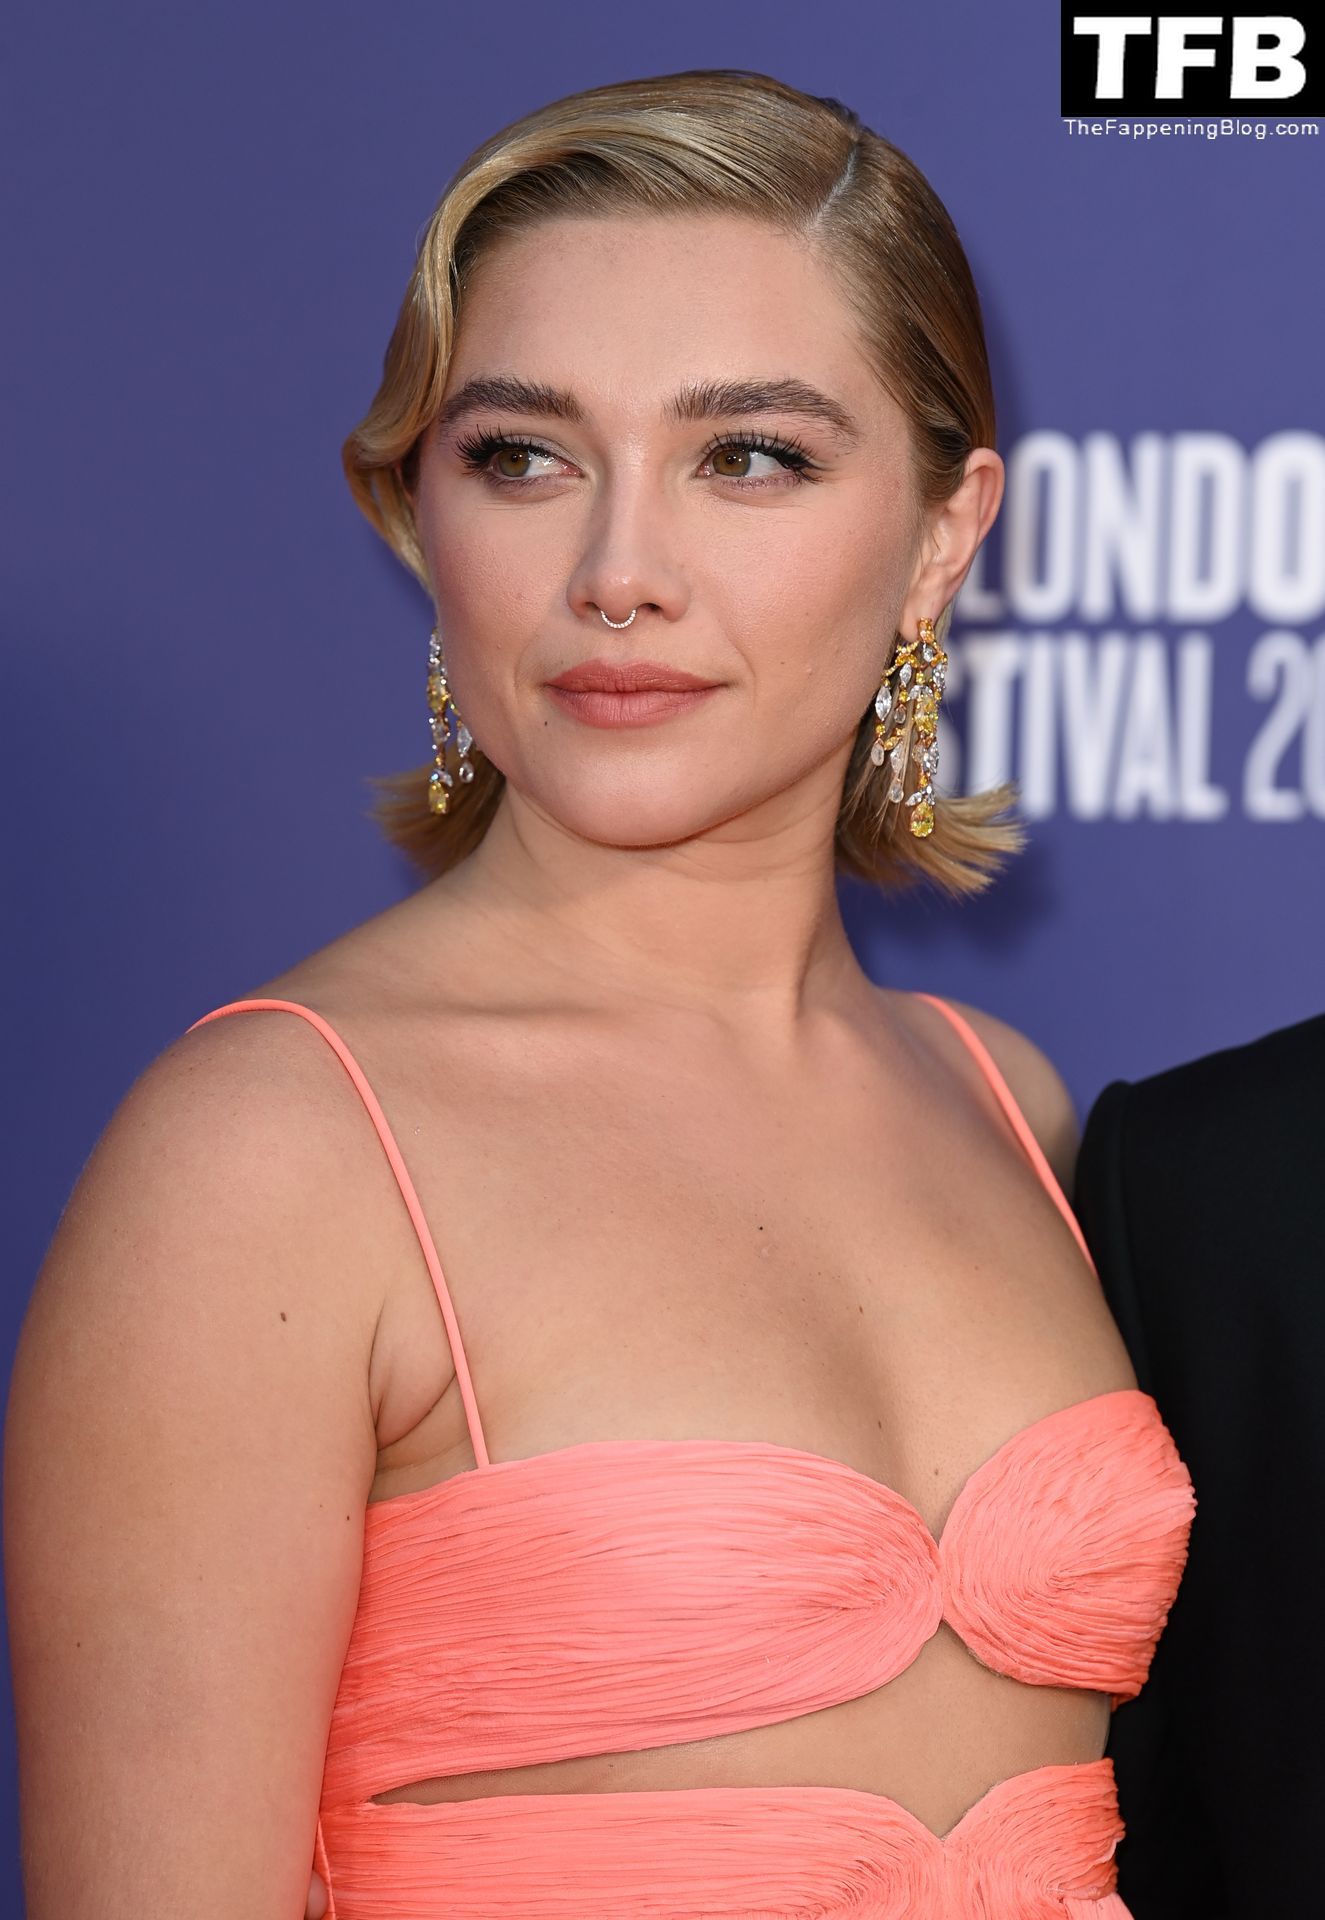 Florence-Pugh-Sexy-The-Fappening-Blog-47-1.jpg